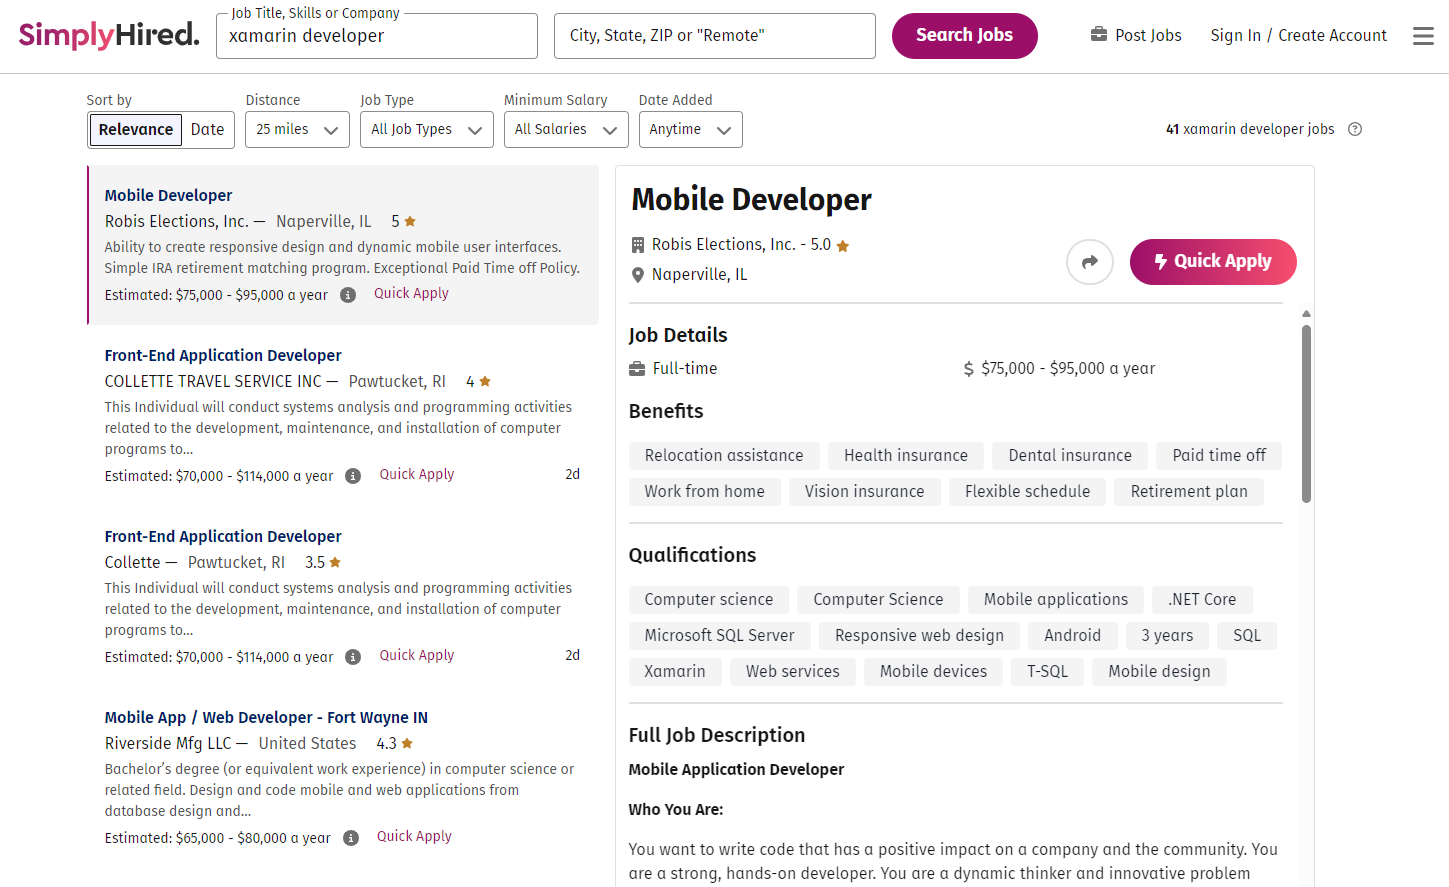 Simplyhired.com - A Comprehensive Job Search Engine for Xamarin Developer Positions